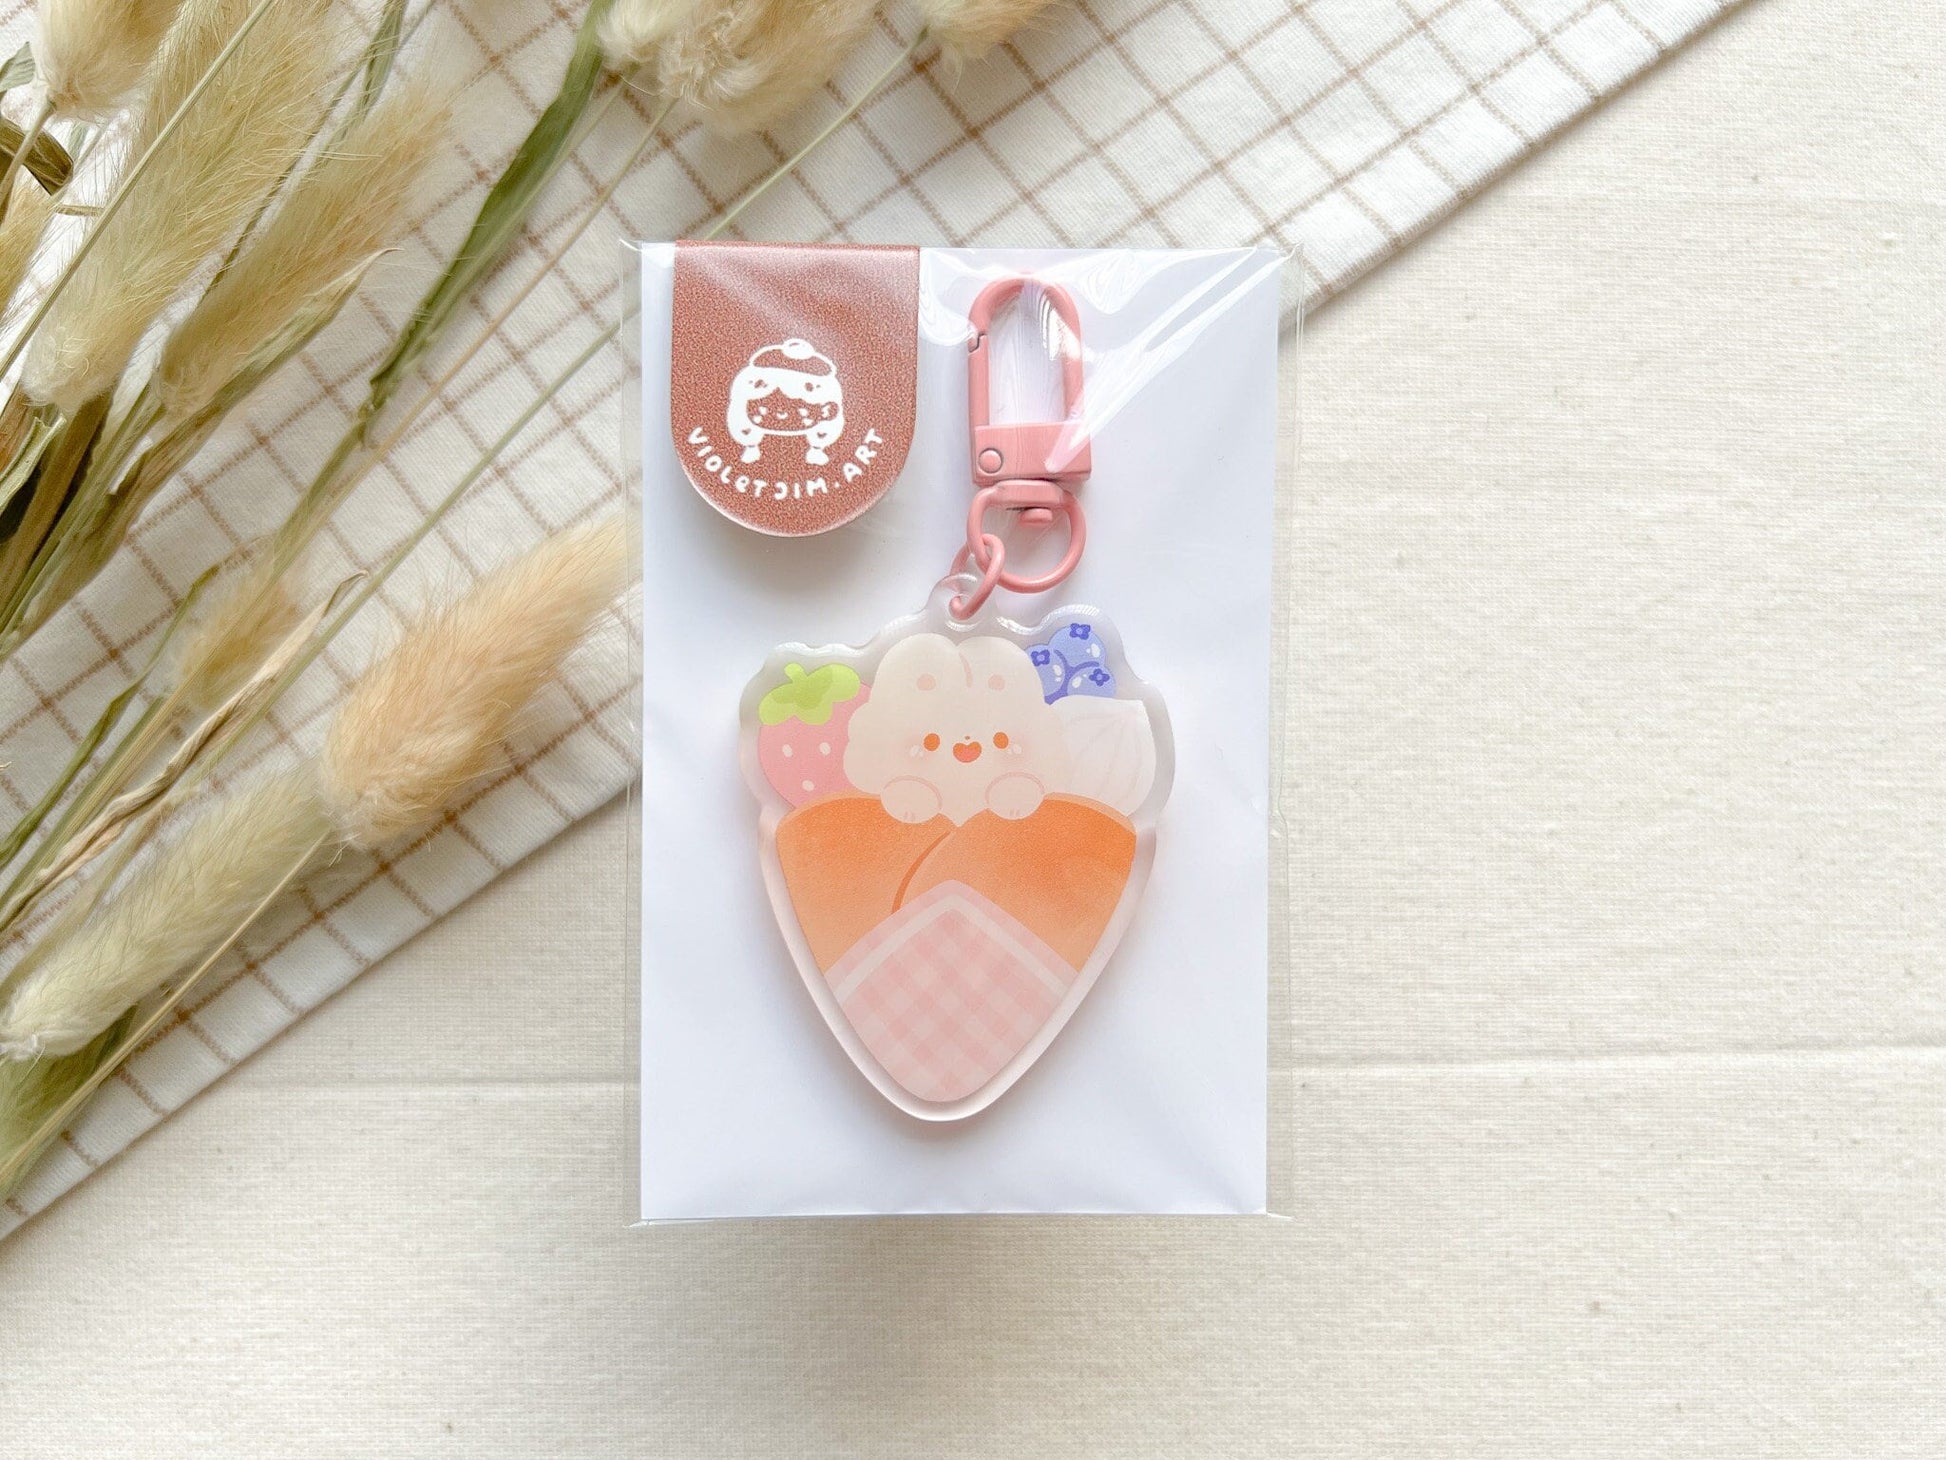 Bunny Bonbon Hiding in Crepe with Berry Fruits Acrylic Keychain - Pink Attachment